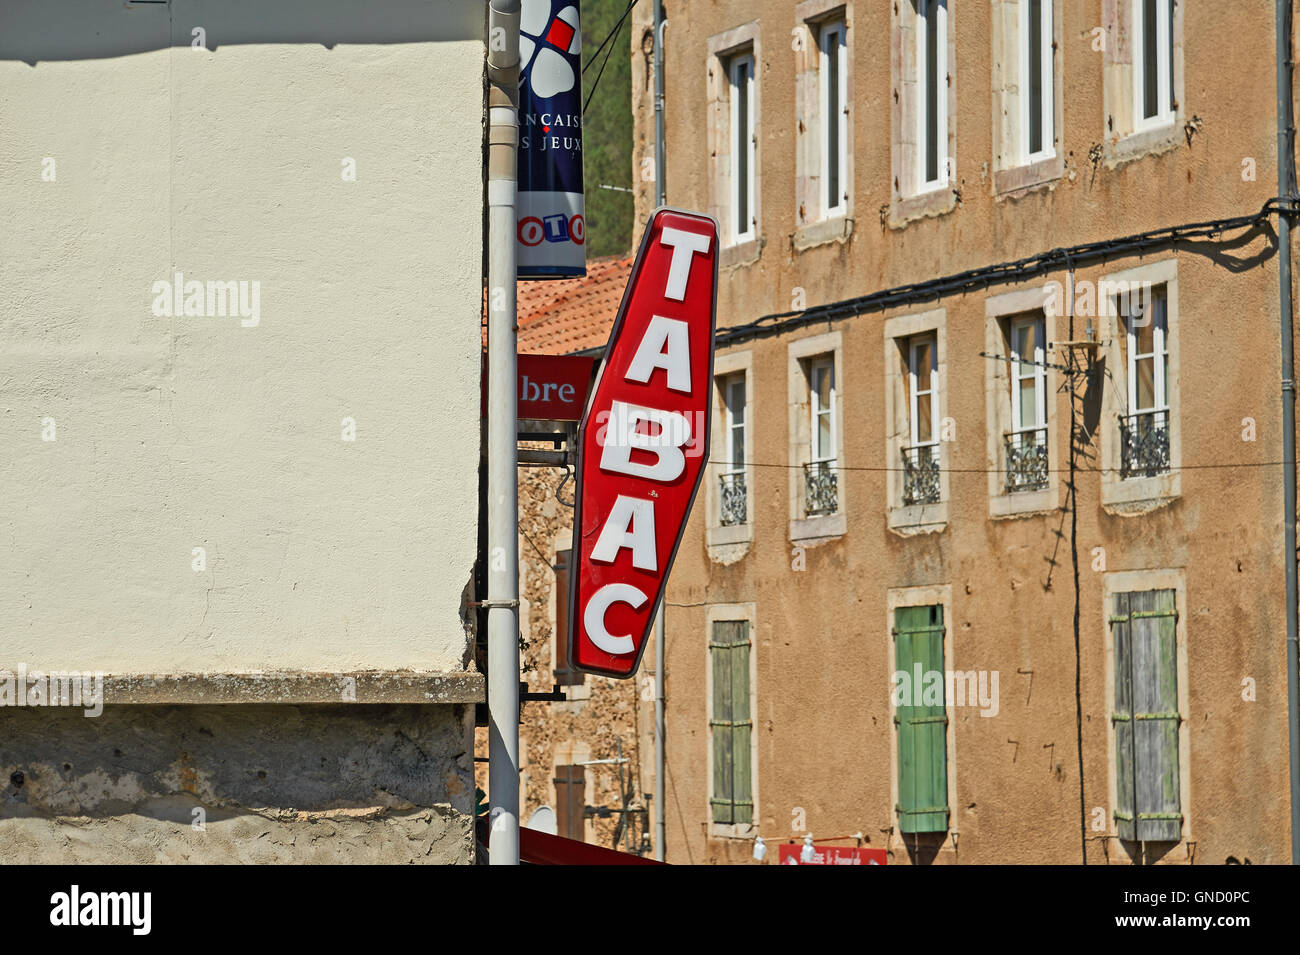 Red and white tabac sign on a building in the French village of Olargues Stock Photo